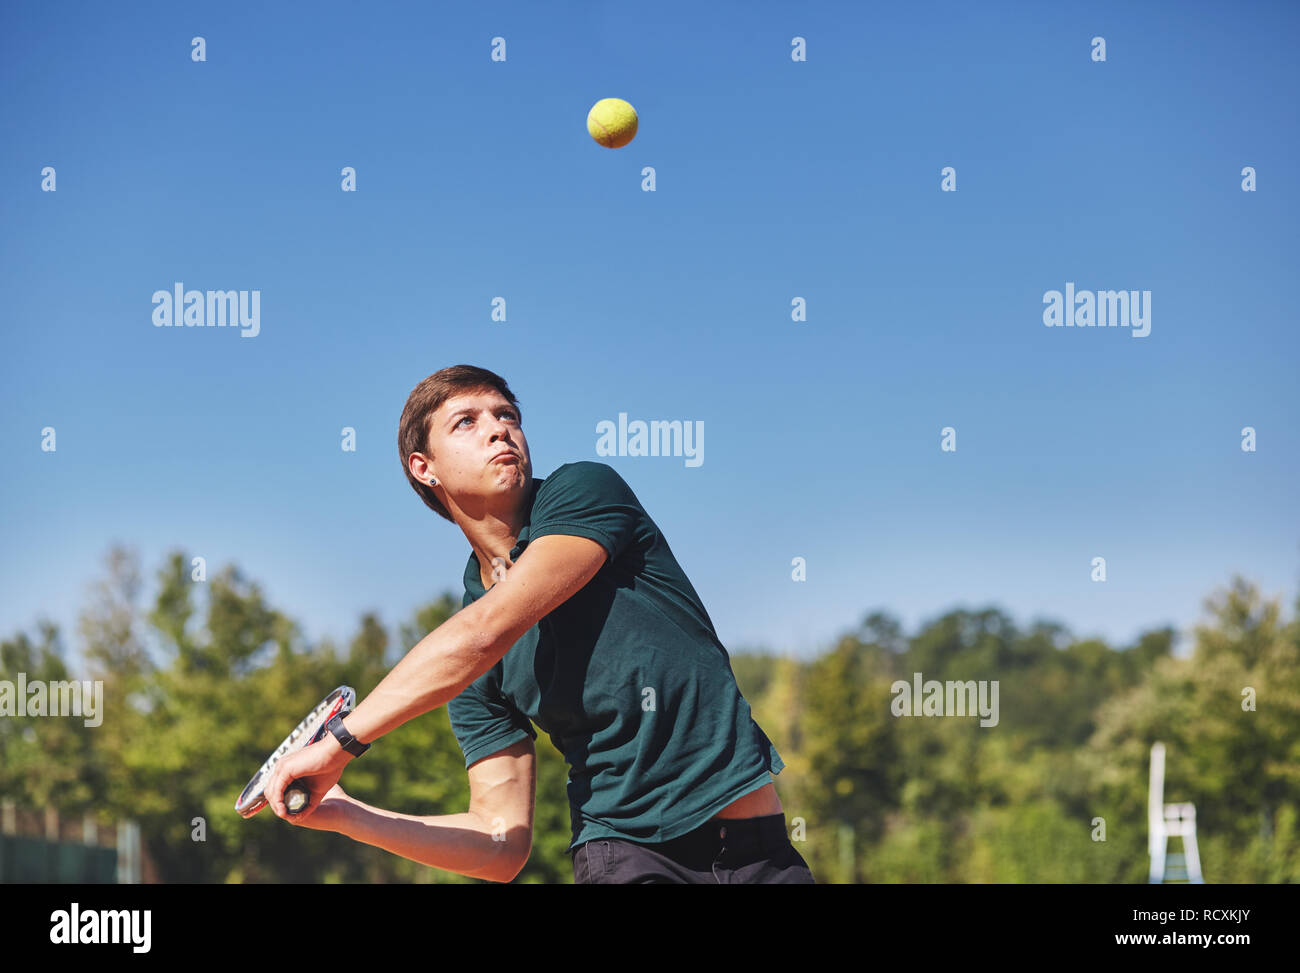 a Man playing tennis on the court on a beautiful sunny day Stock Photo